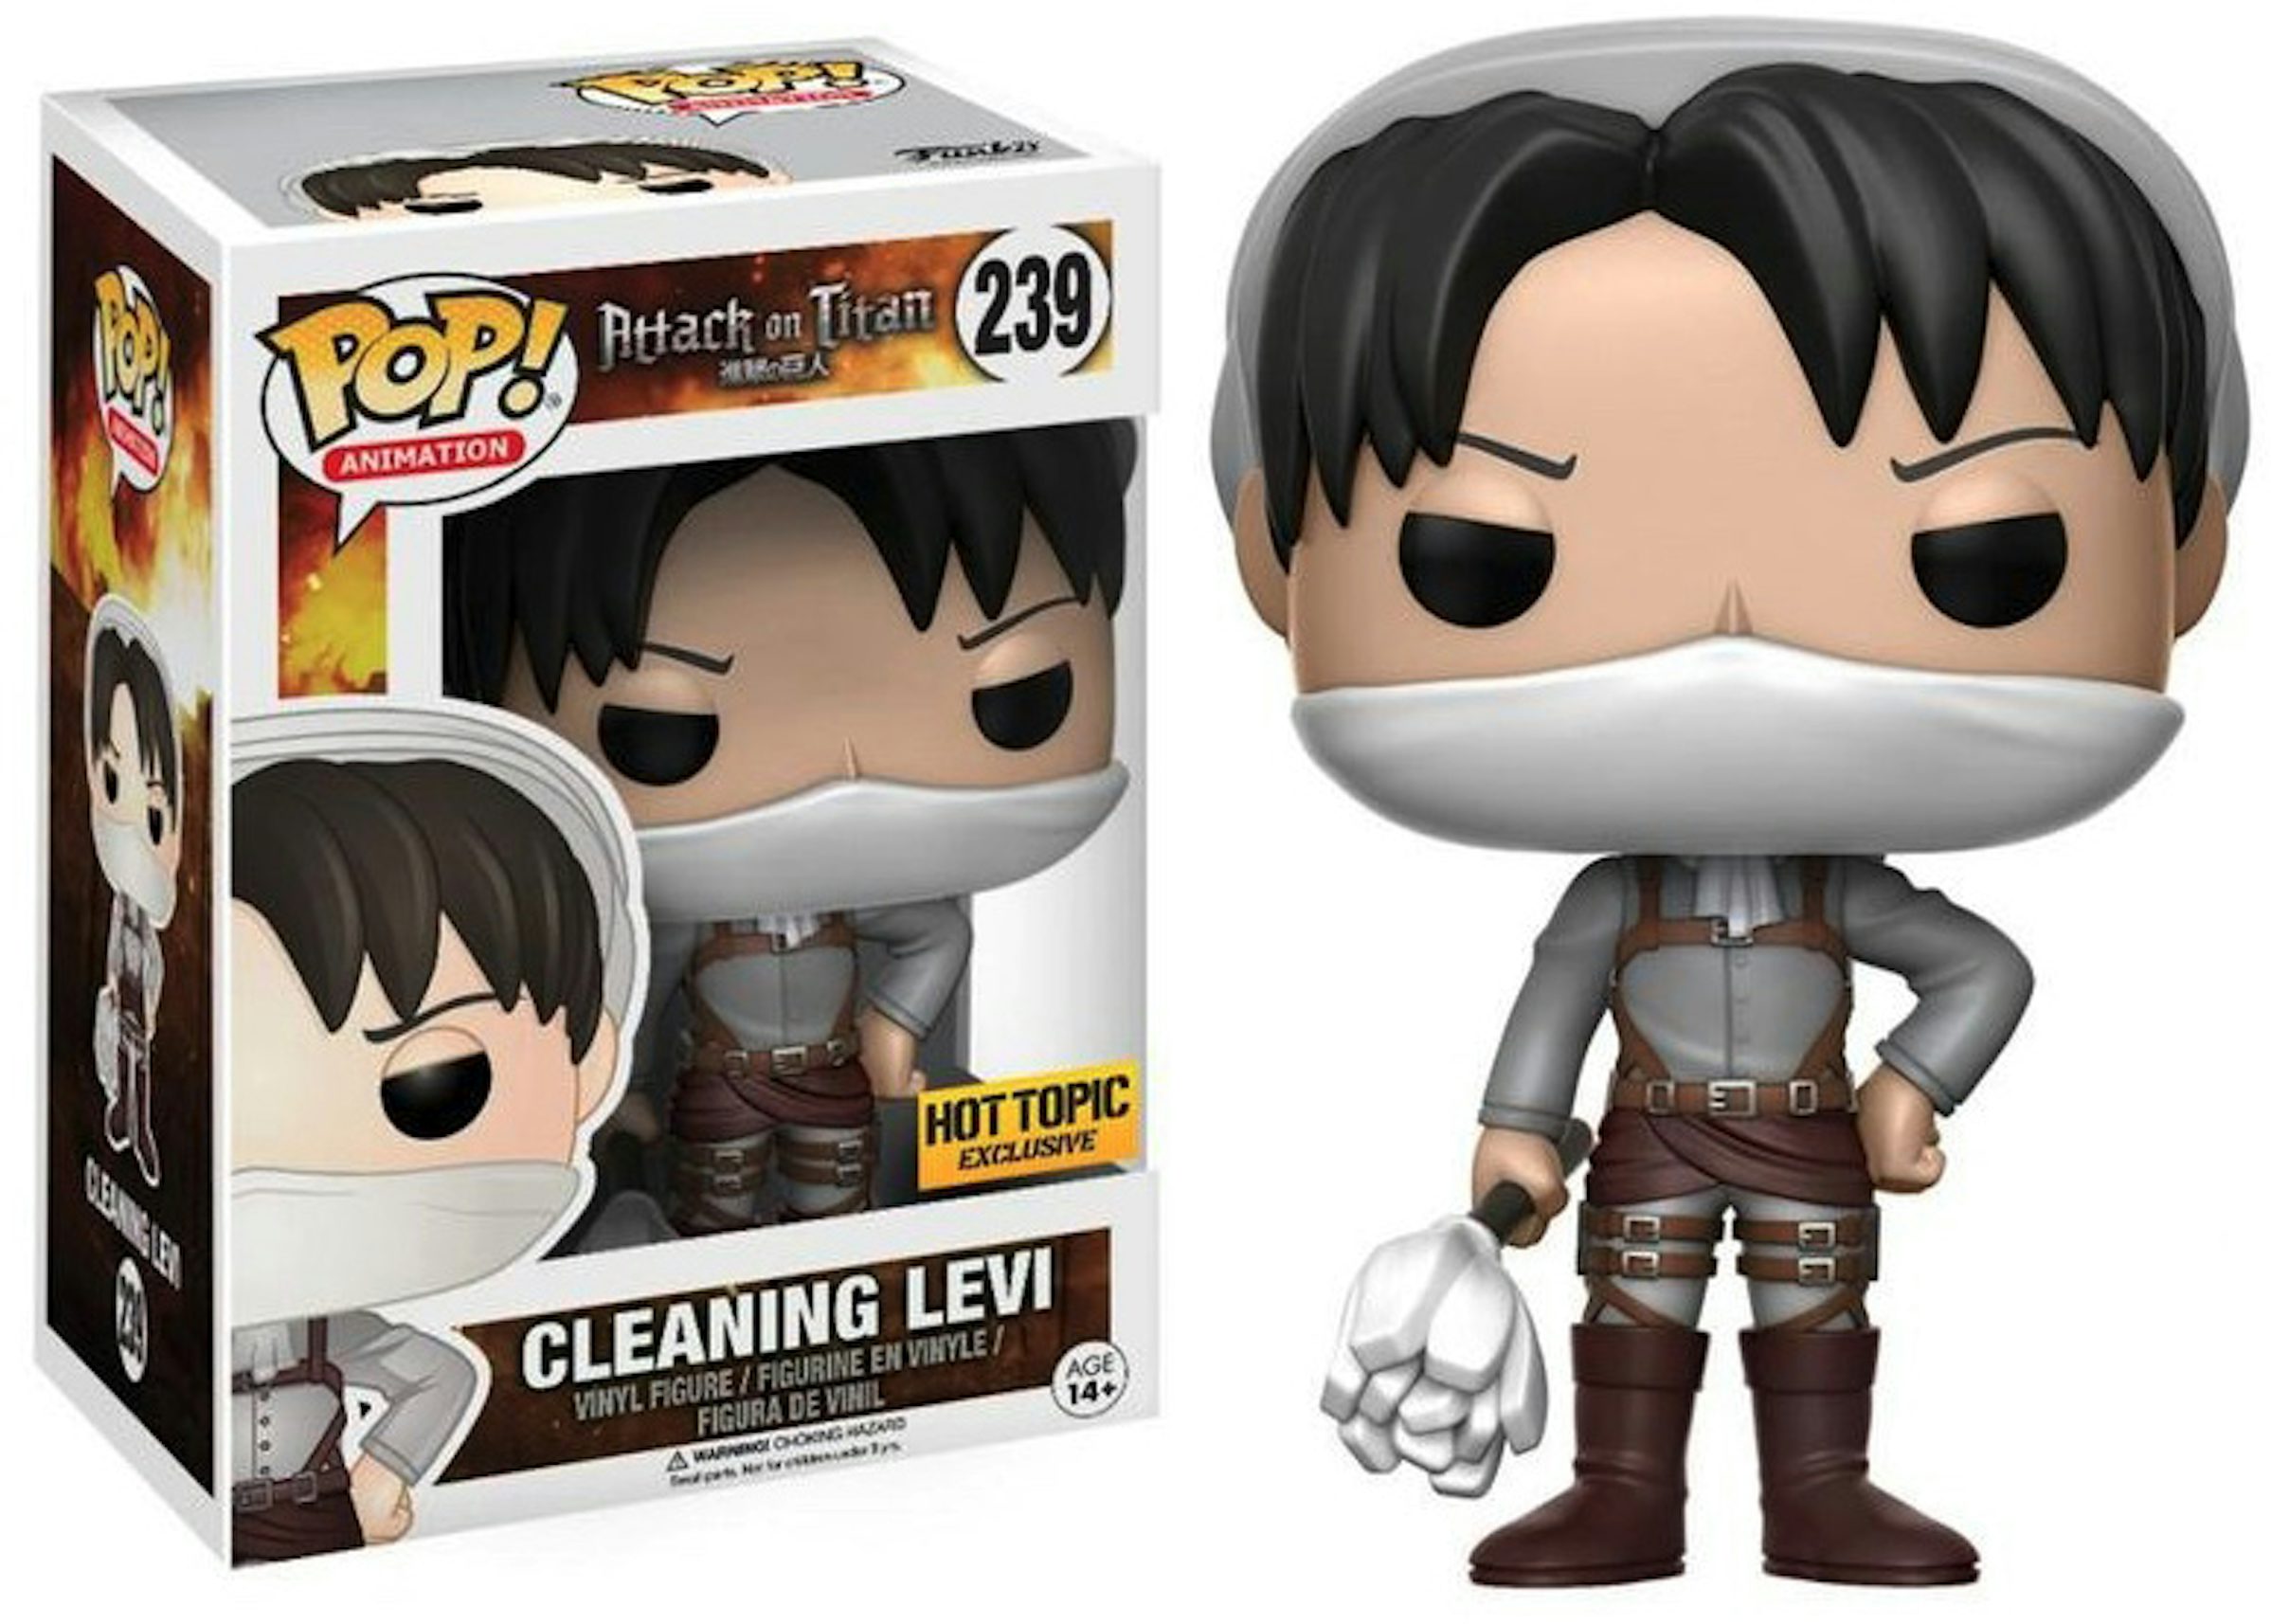 https://images.stockx.com/images/funko-pop-animation-attack-on-titan-cleaning-levi-hot-topic-exclusive-figure-239-Updated.jpg?fit=fill&bg=FFFFFF&w=1200&h=857&fm=jpg&auto=compress&dpr=2&trim=color&updated_at=1626289520&q=60